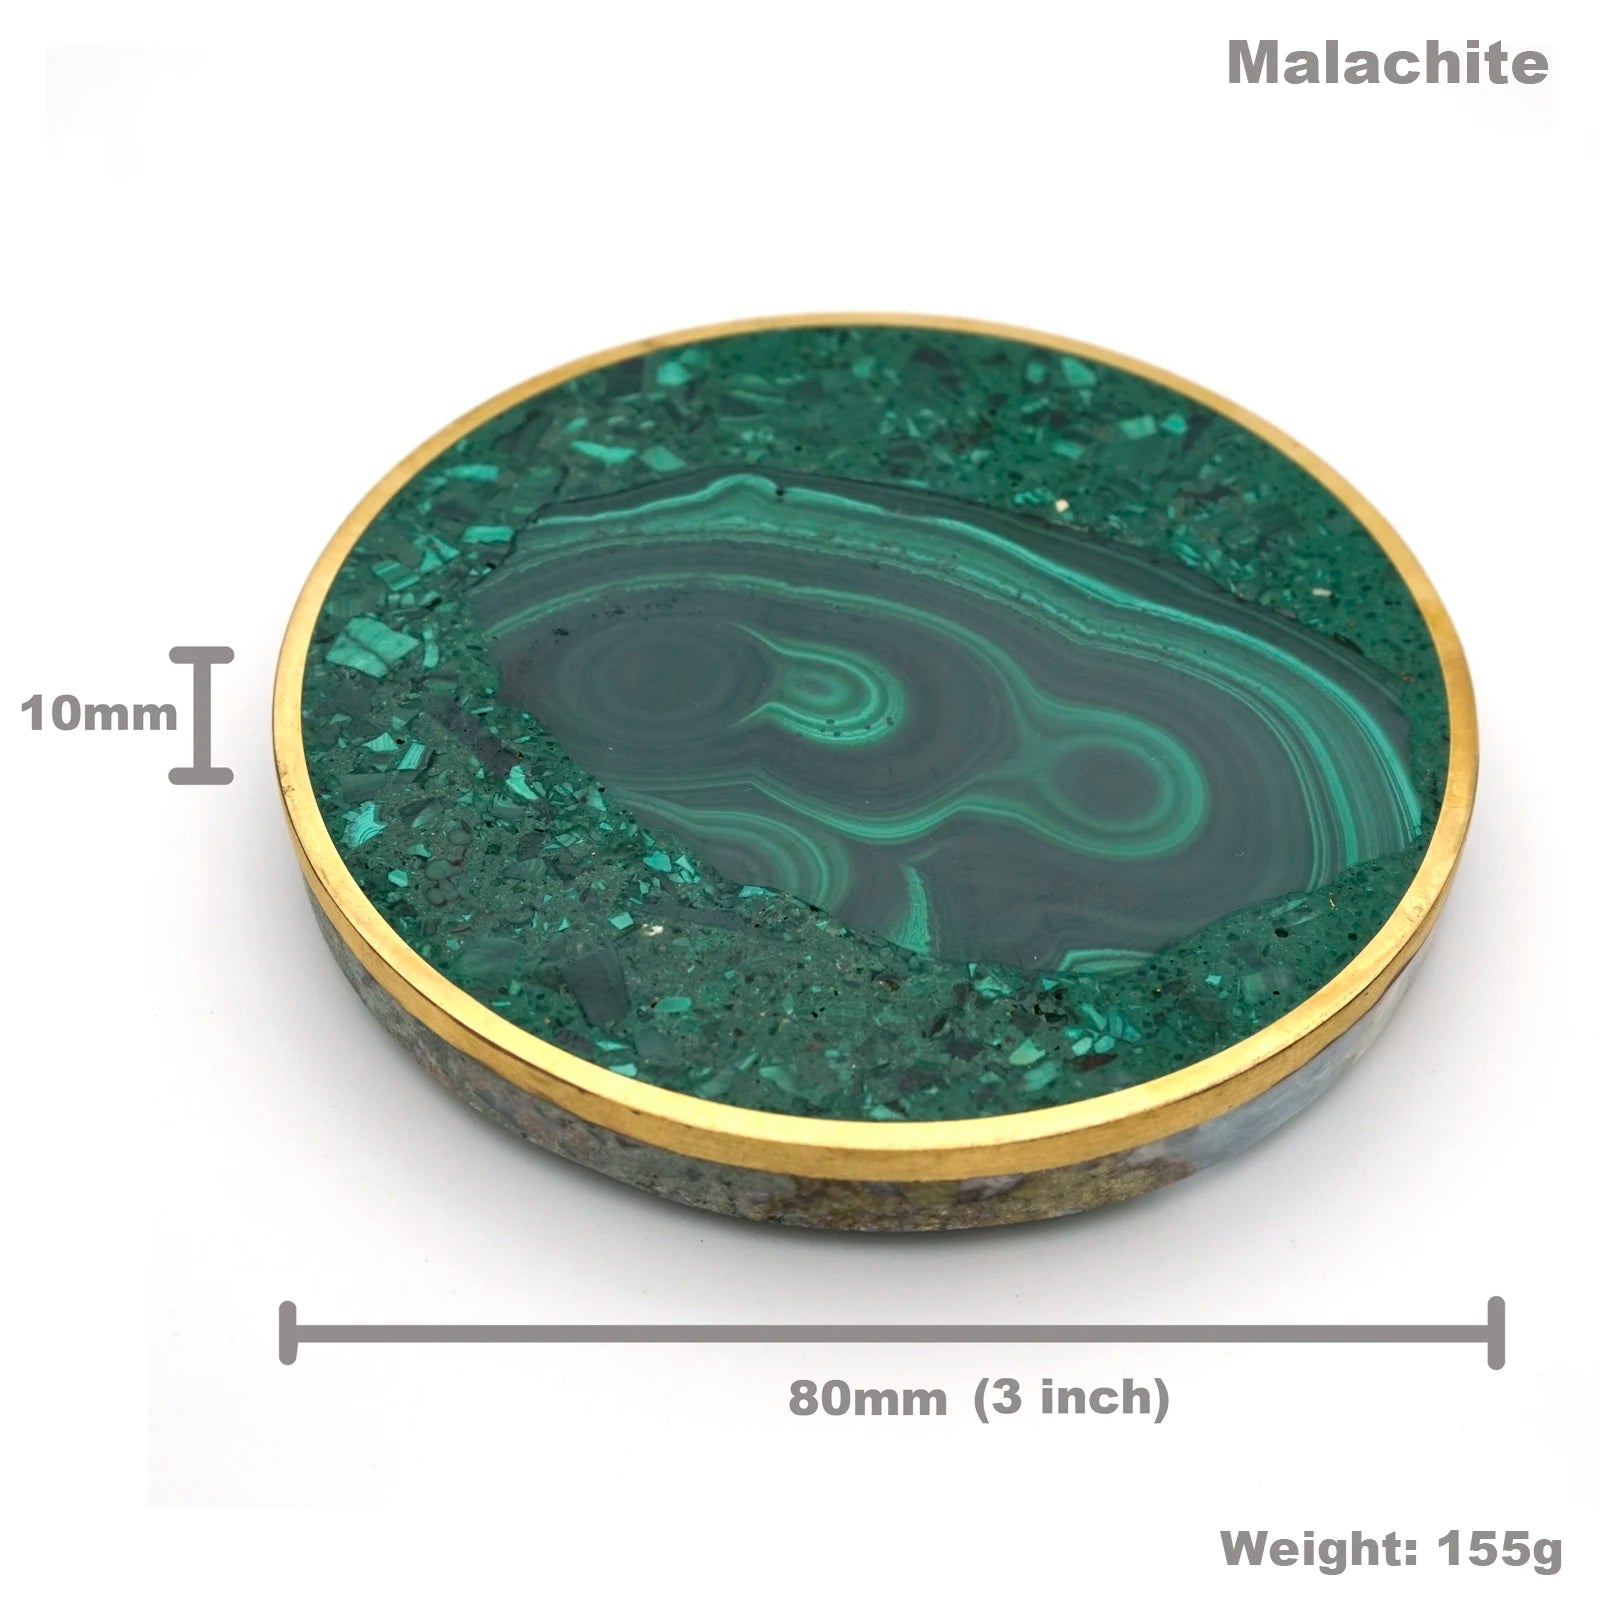 3 Inch Malachite Coaster Single Piece for Hot& Cold Drinks, Thermal insulation pads, Temperature restrict, for all seasons acacuss